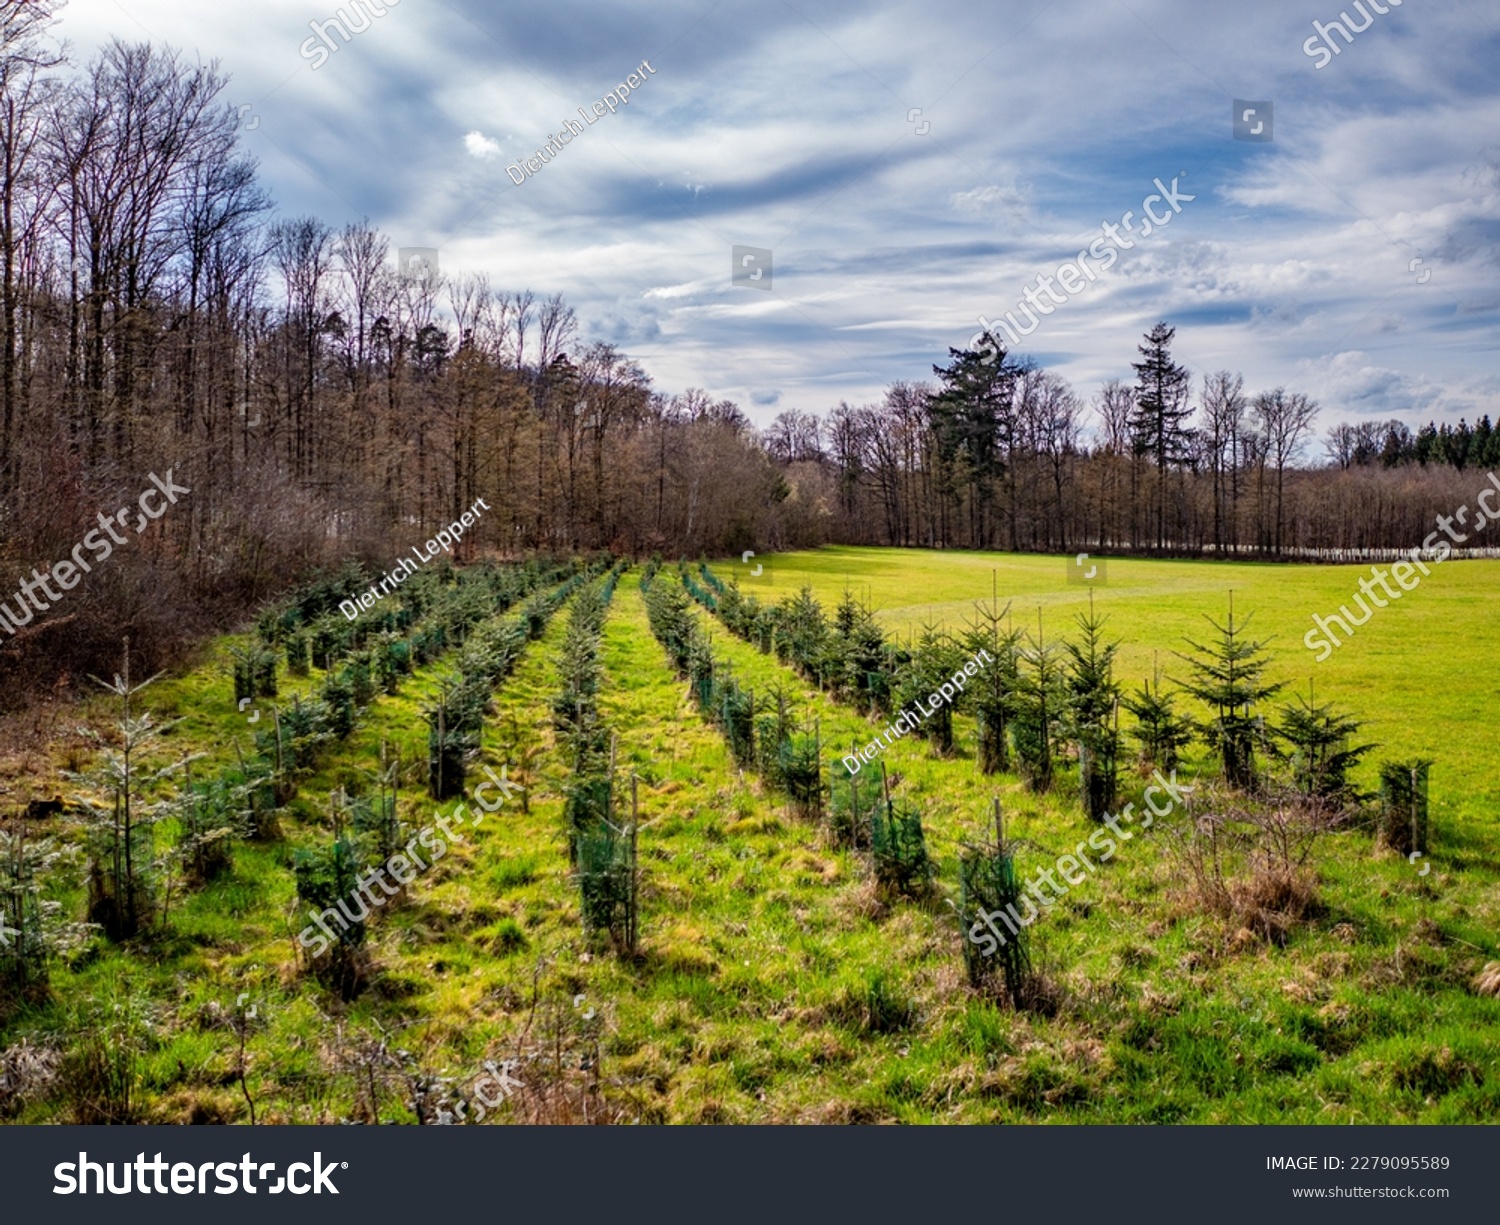 Reforestation in mixed forest by planting young trees #2279095589